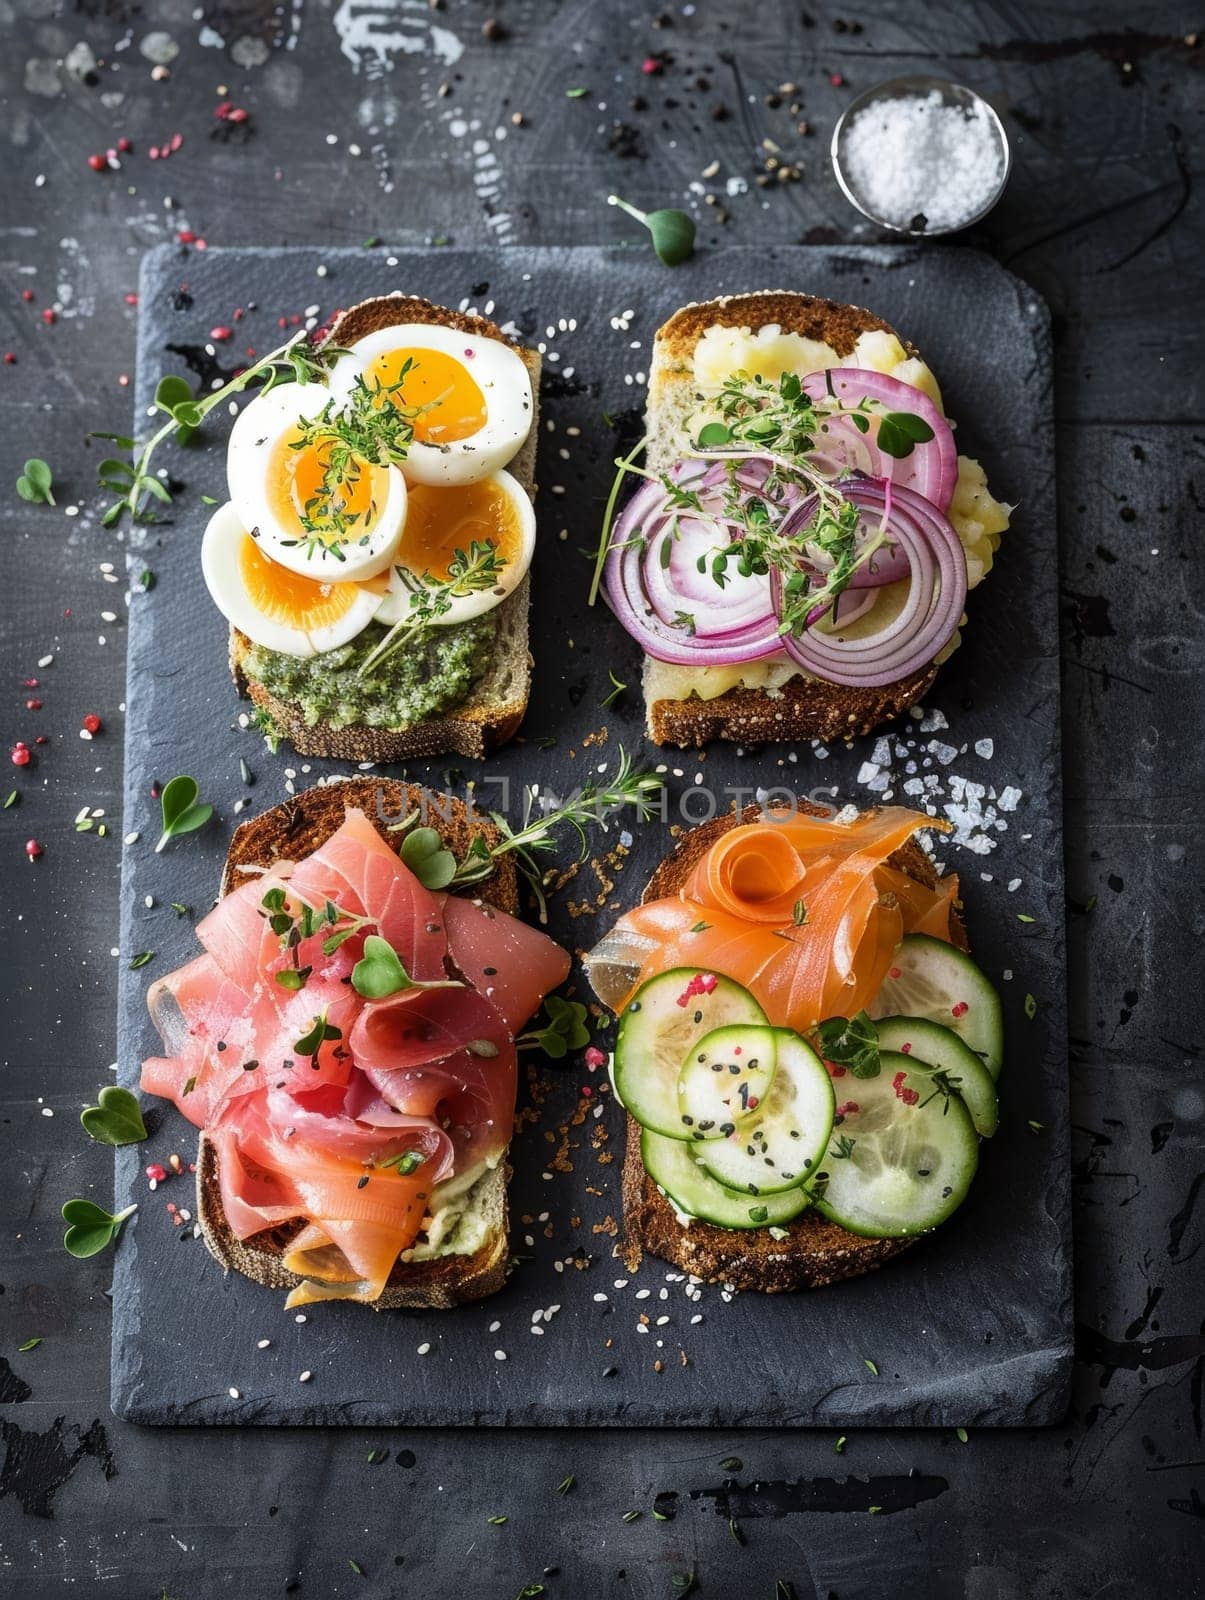 Authentic Danish smorrebrod, a selection of open-faced sandwiches with various savory toppings, elegantly presented on a slate plate - a mouthwatering representation of the rich culinary traditions